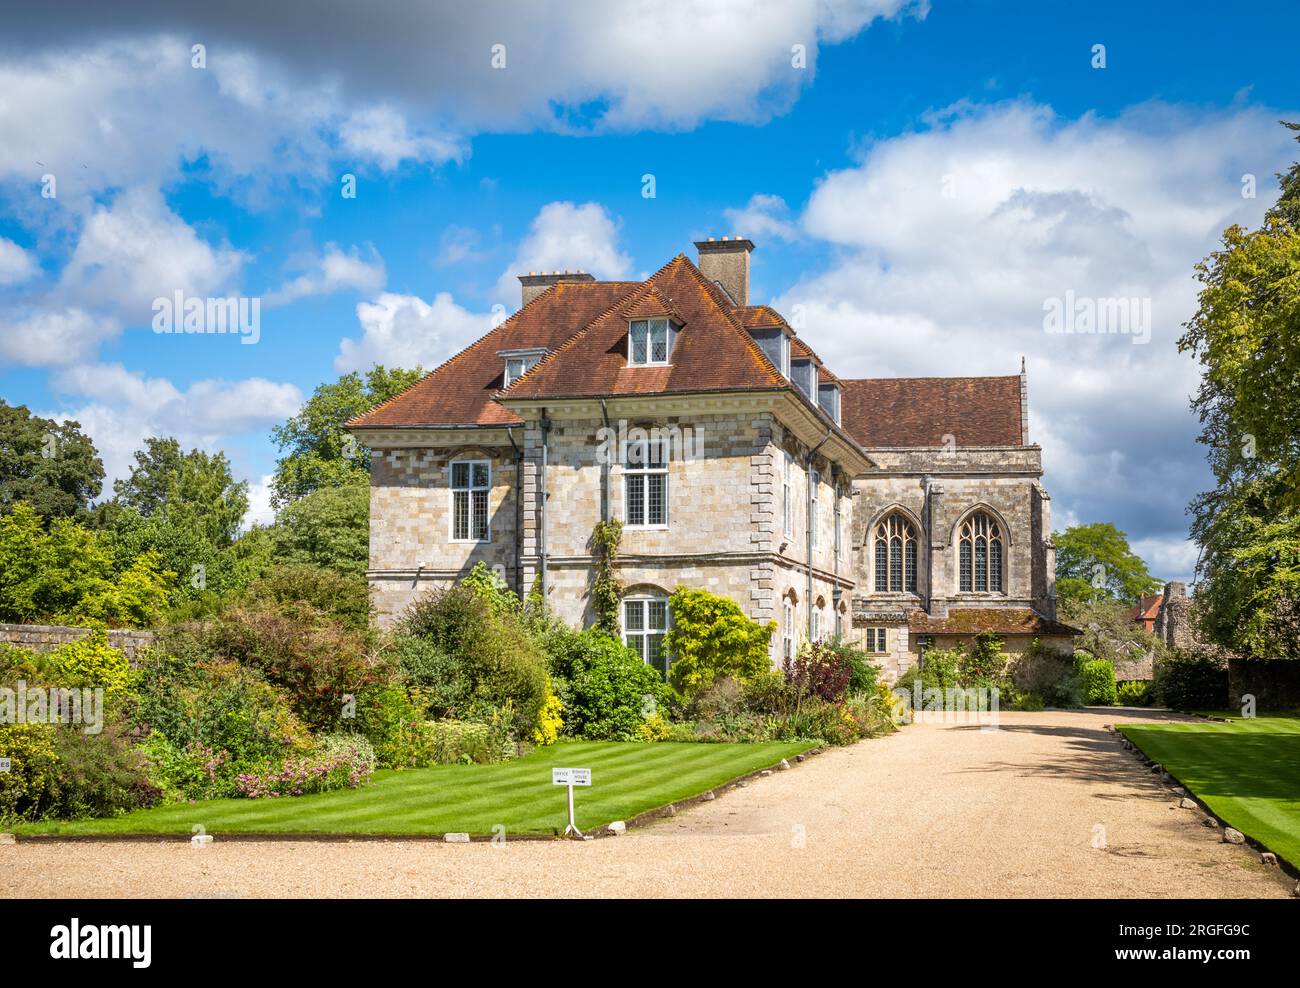 'New' Wolvesey Palace, or Bishop's House, the official residence and office of the Bishop of Winchester, in Winchester, Hampshire, UK. The building wa Stock Photo